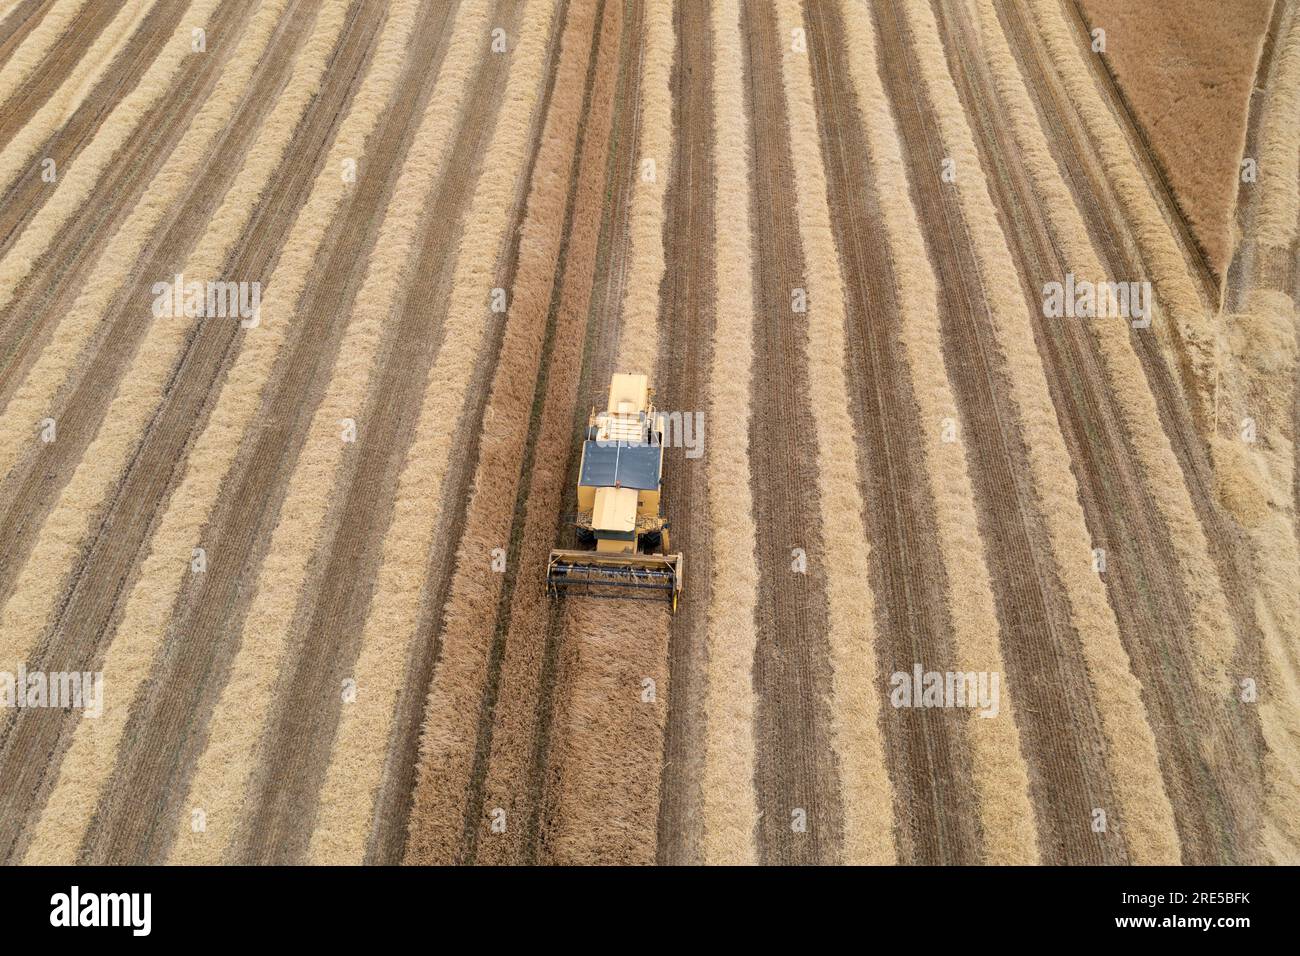 Aerial drone view of a New Holland Combine Harvester harvesting a crop near Cardenden, Fife, Scotland. Stock Photo